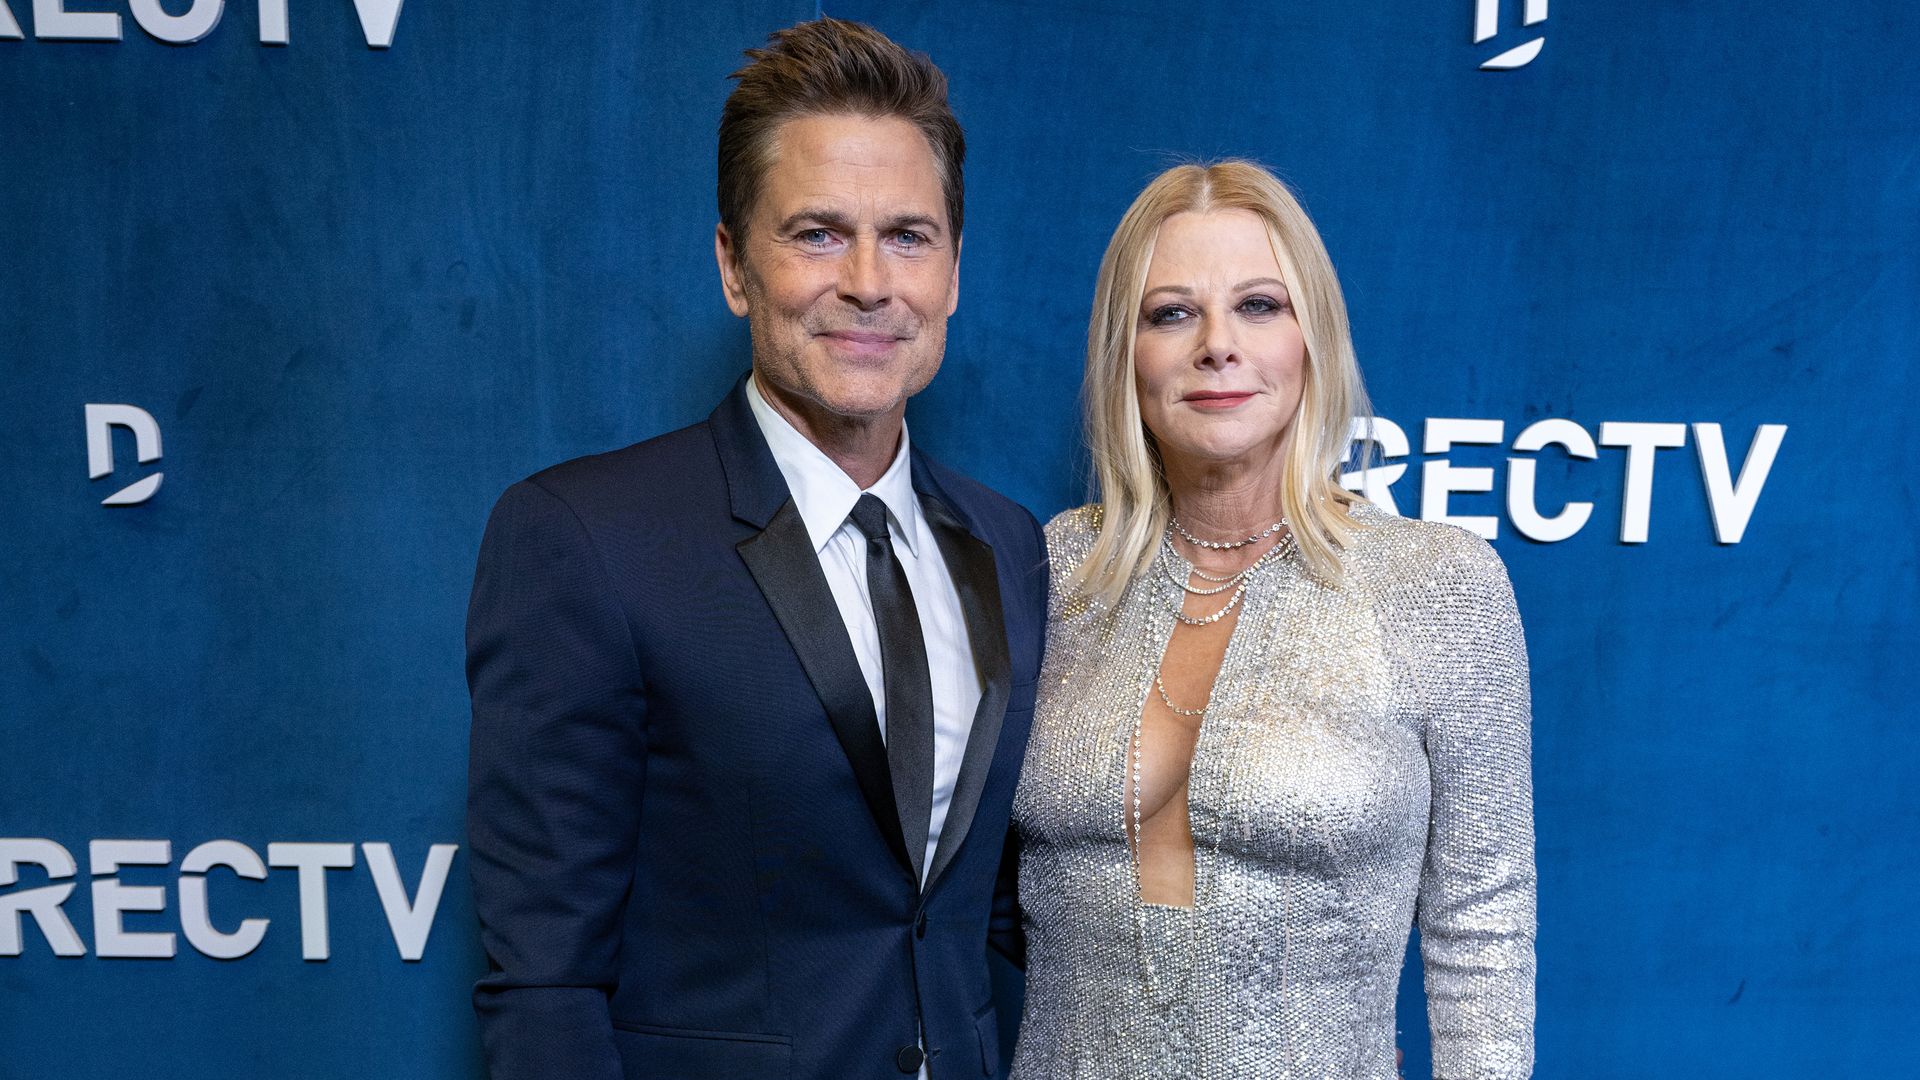 Rob Lowe, 59, looks smitten as he joins wife Sheryl Berkoff, 62, on the red carpet